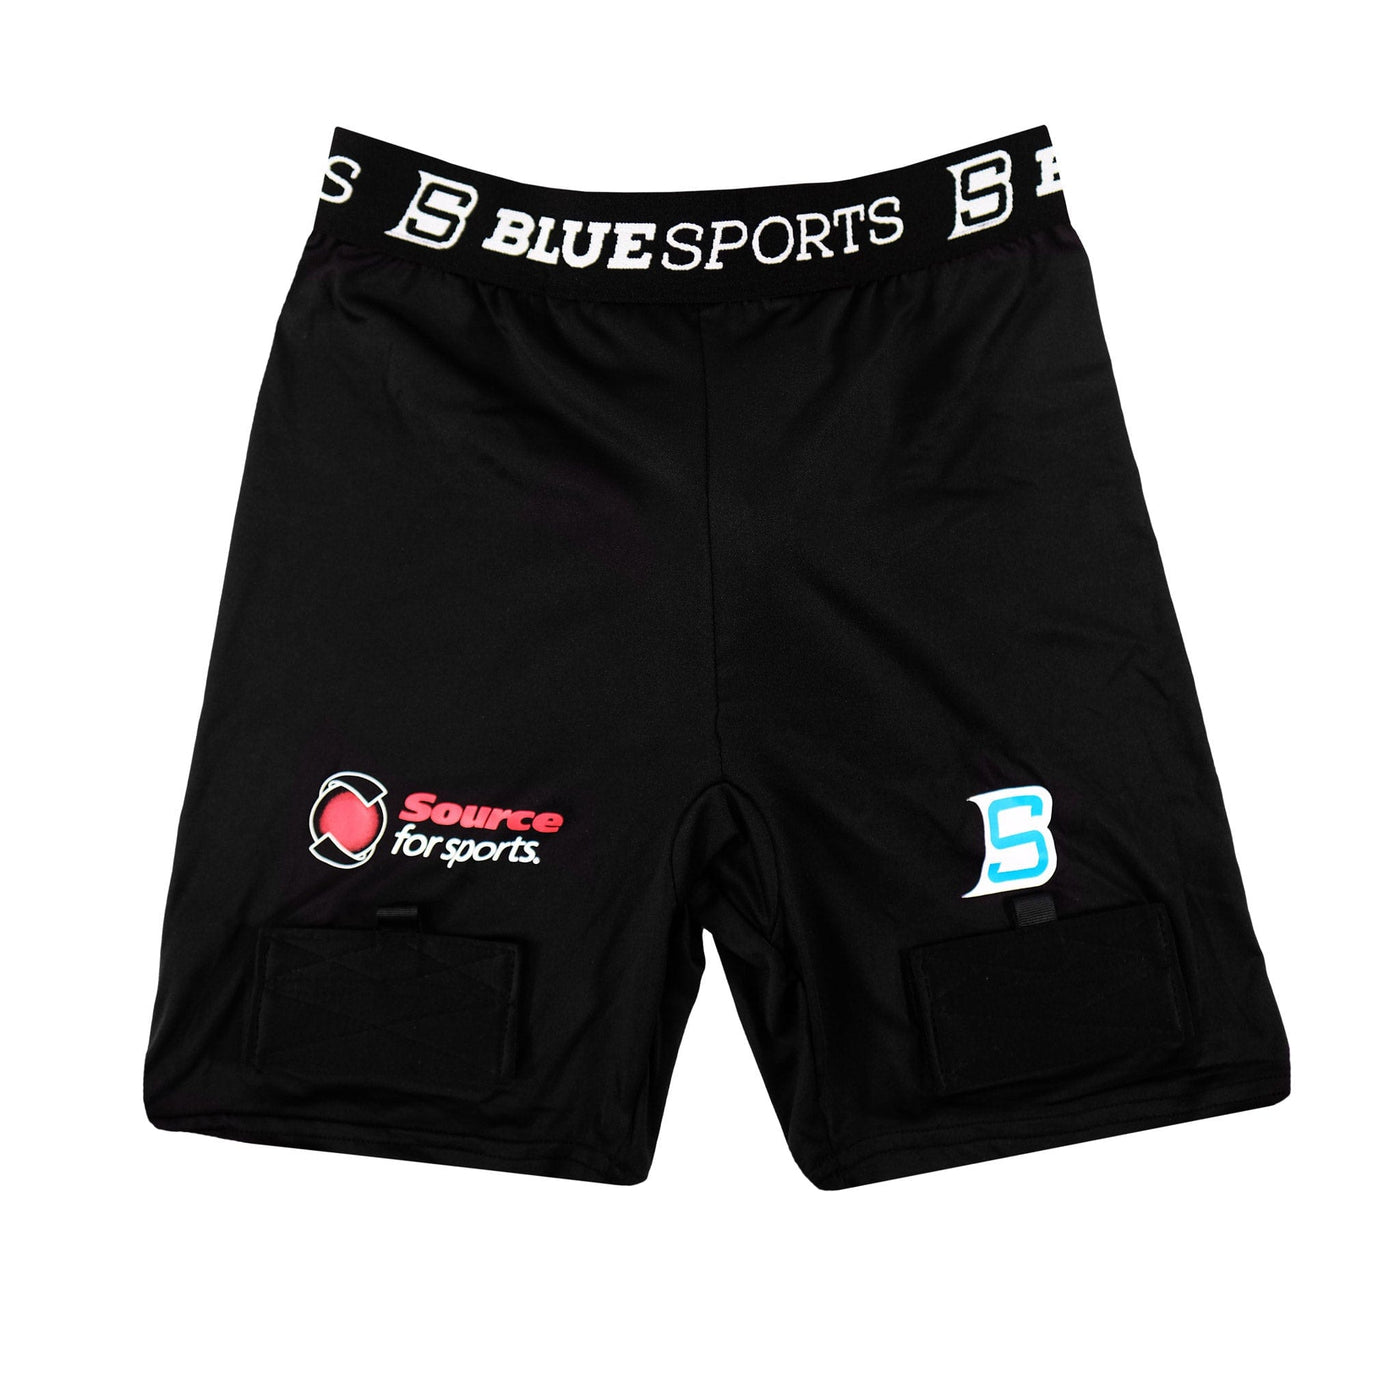 Blue Sports Classic Junior Compression Jock Shorts - The Hockey Shop Source For Sports